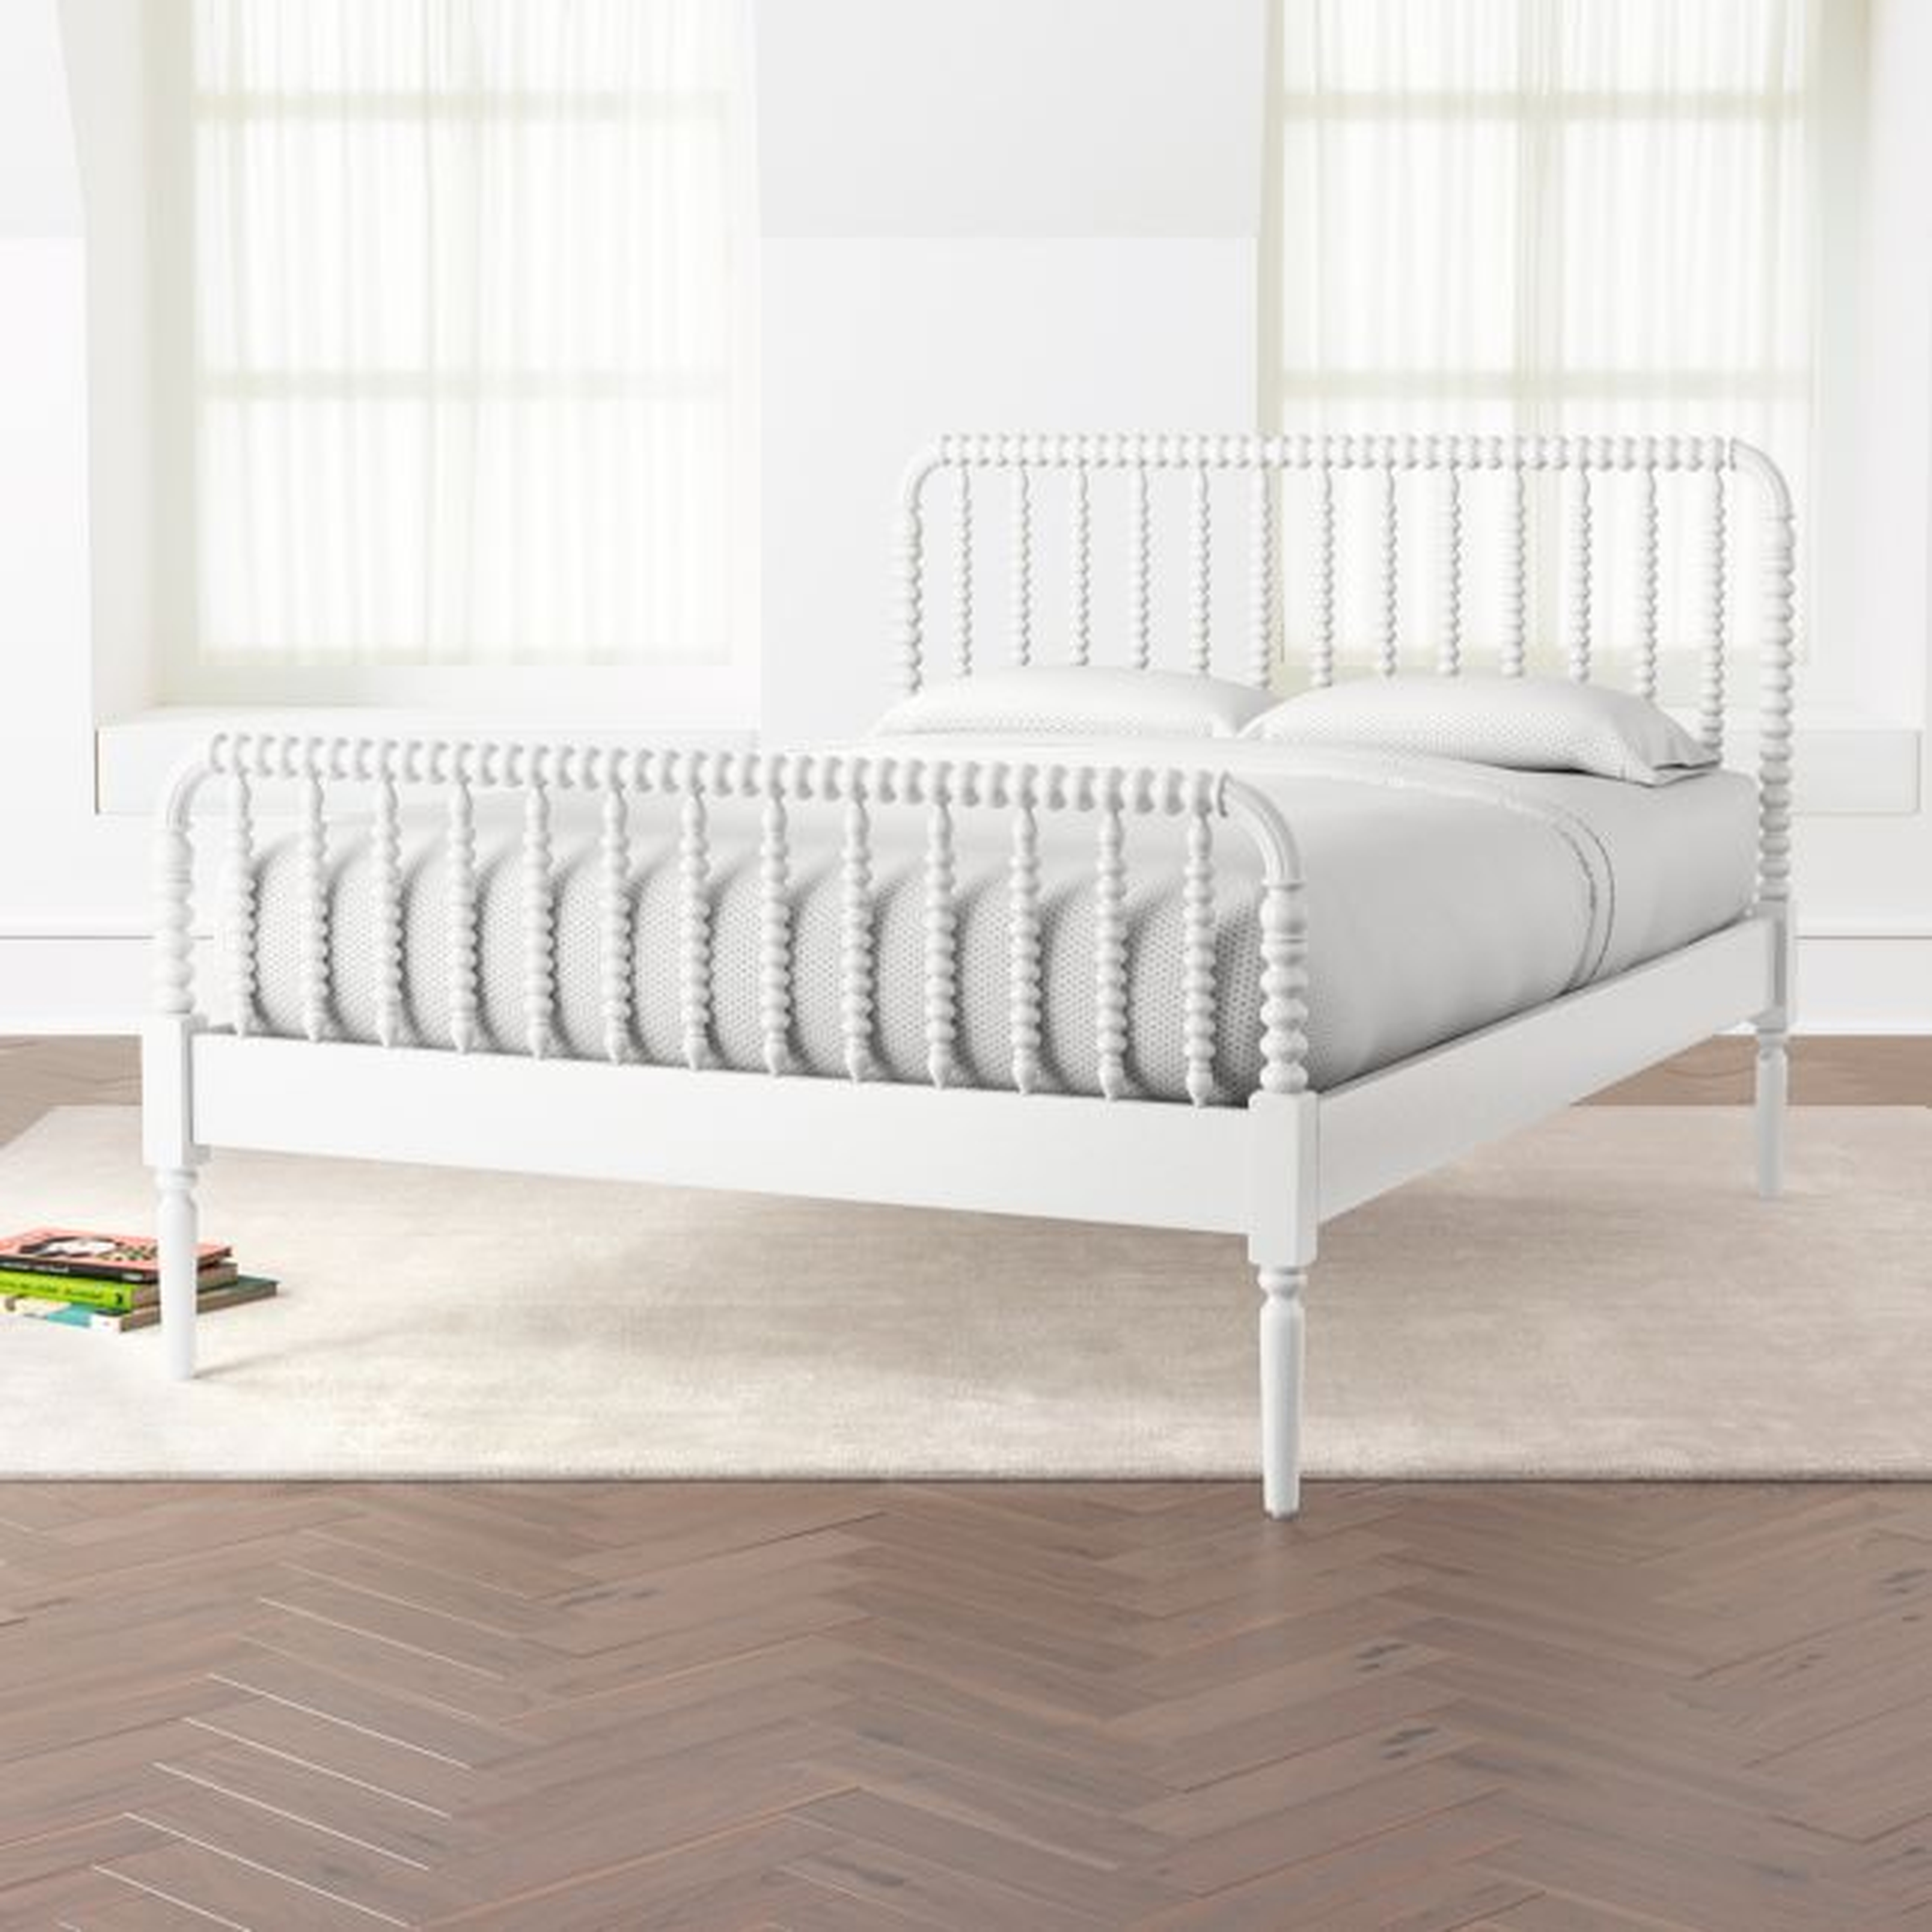 Jenny Lind White Full Bed - Crate and Barrel